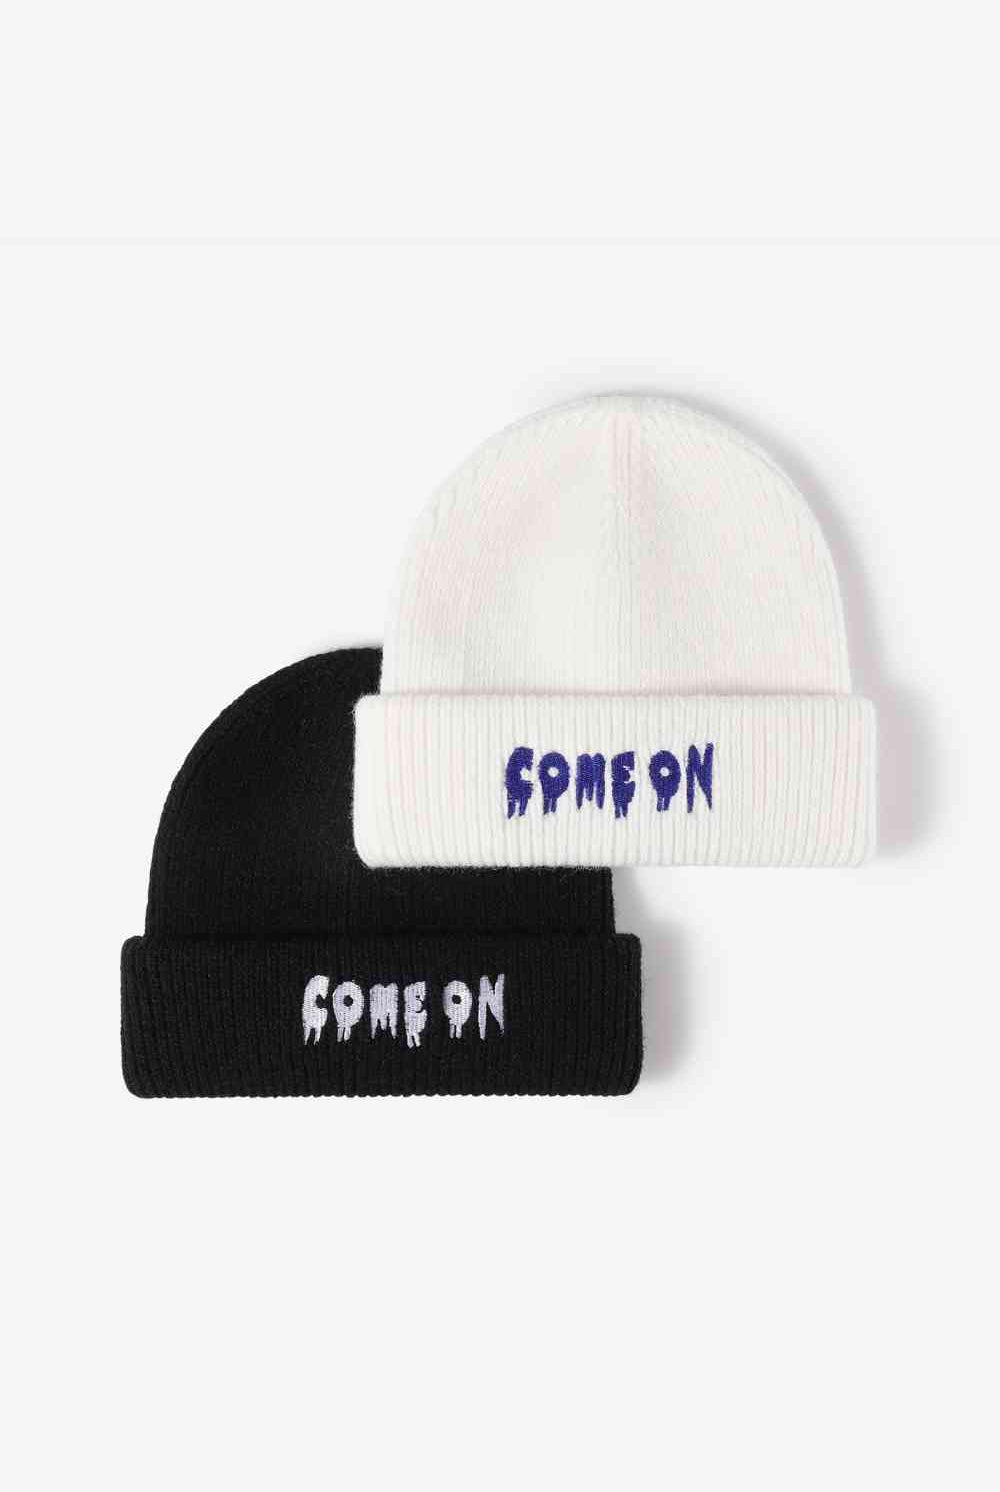 White Smoke COME ON Embroidered Cuff Knit Beanie Winter Accessories